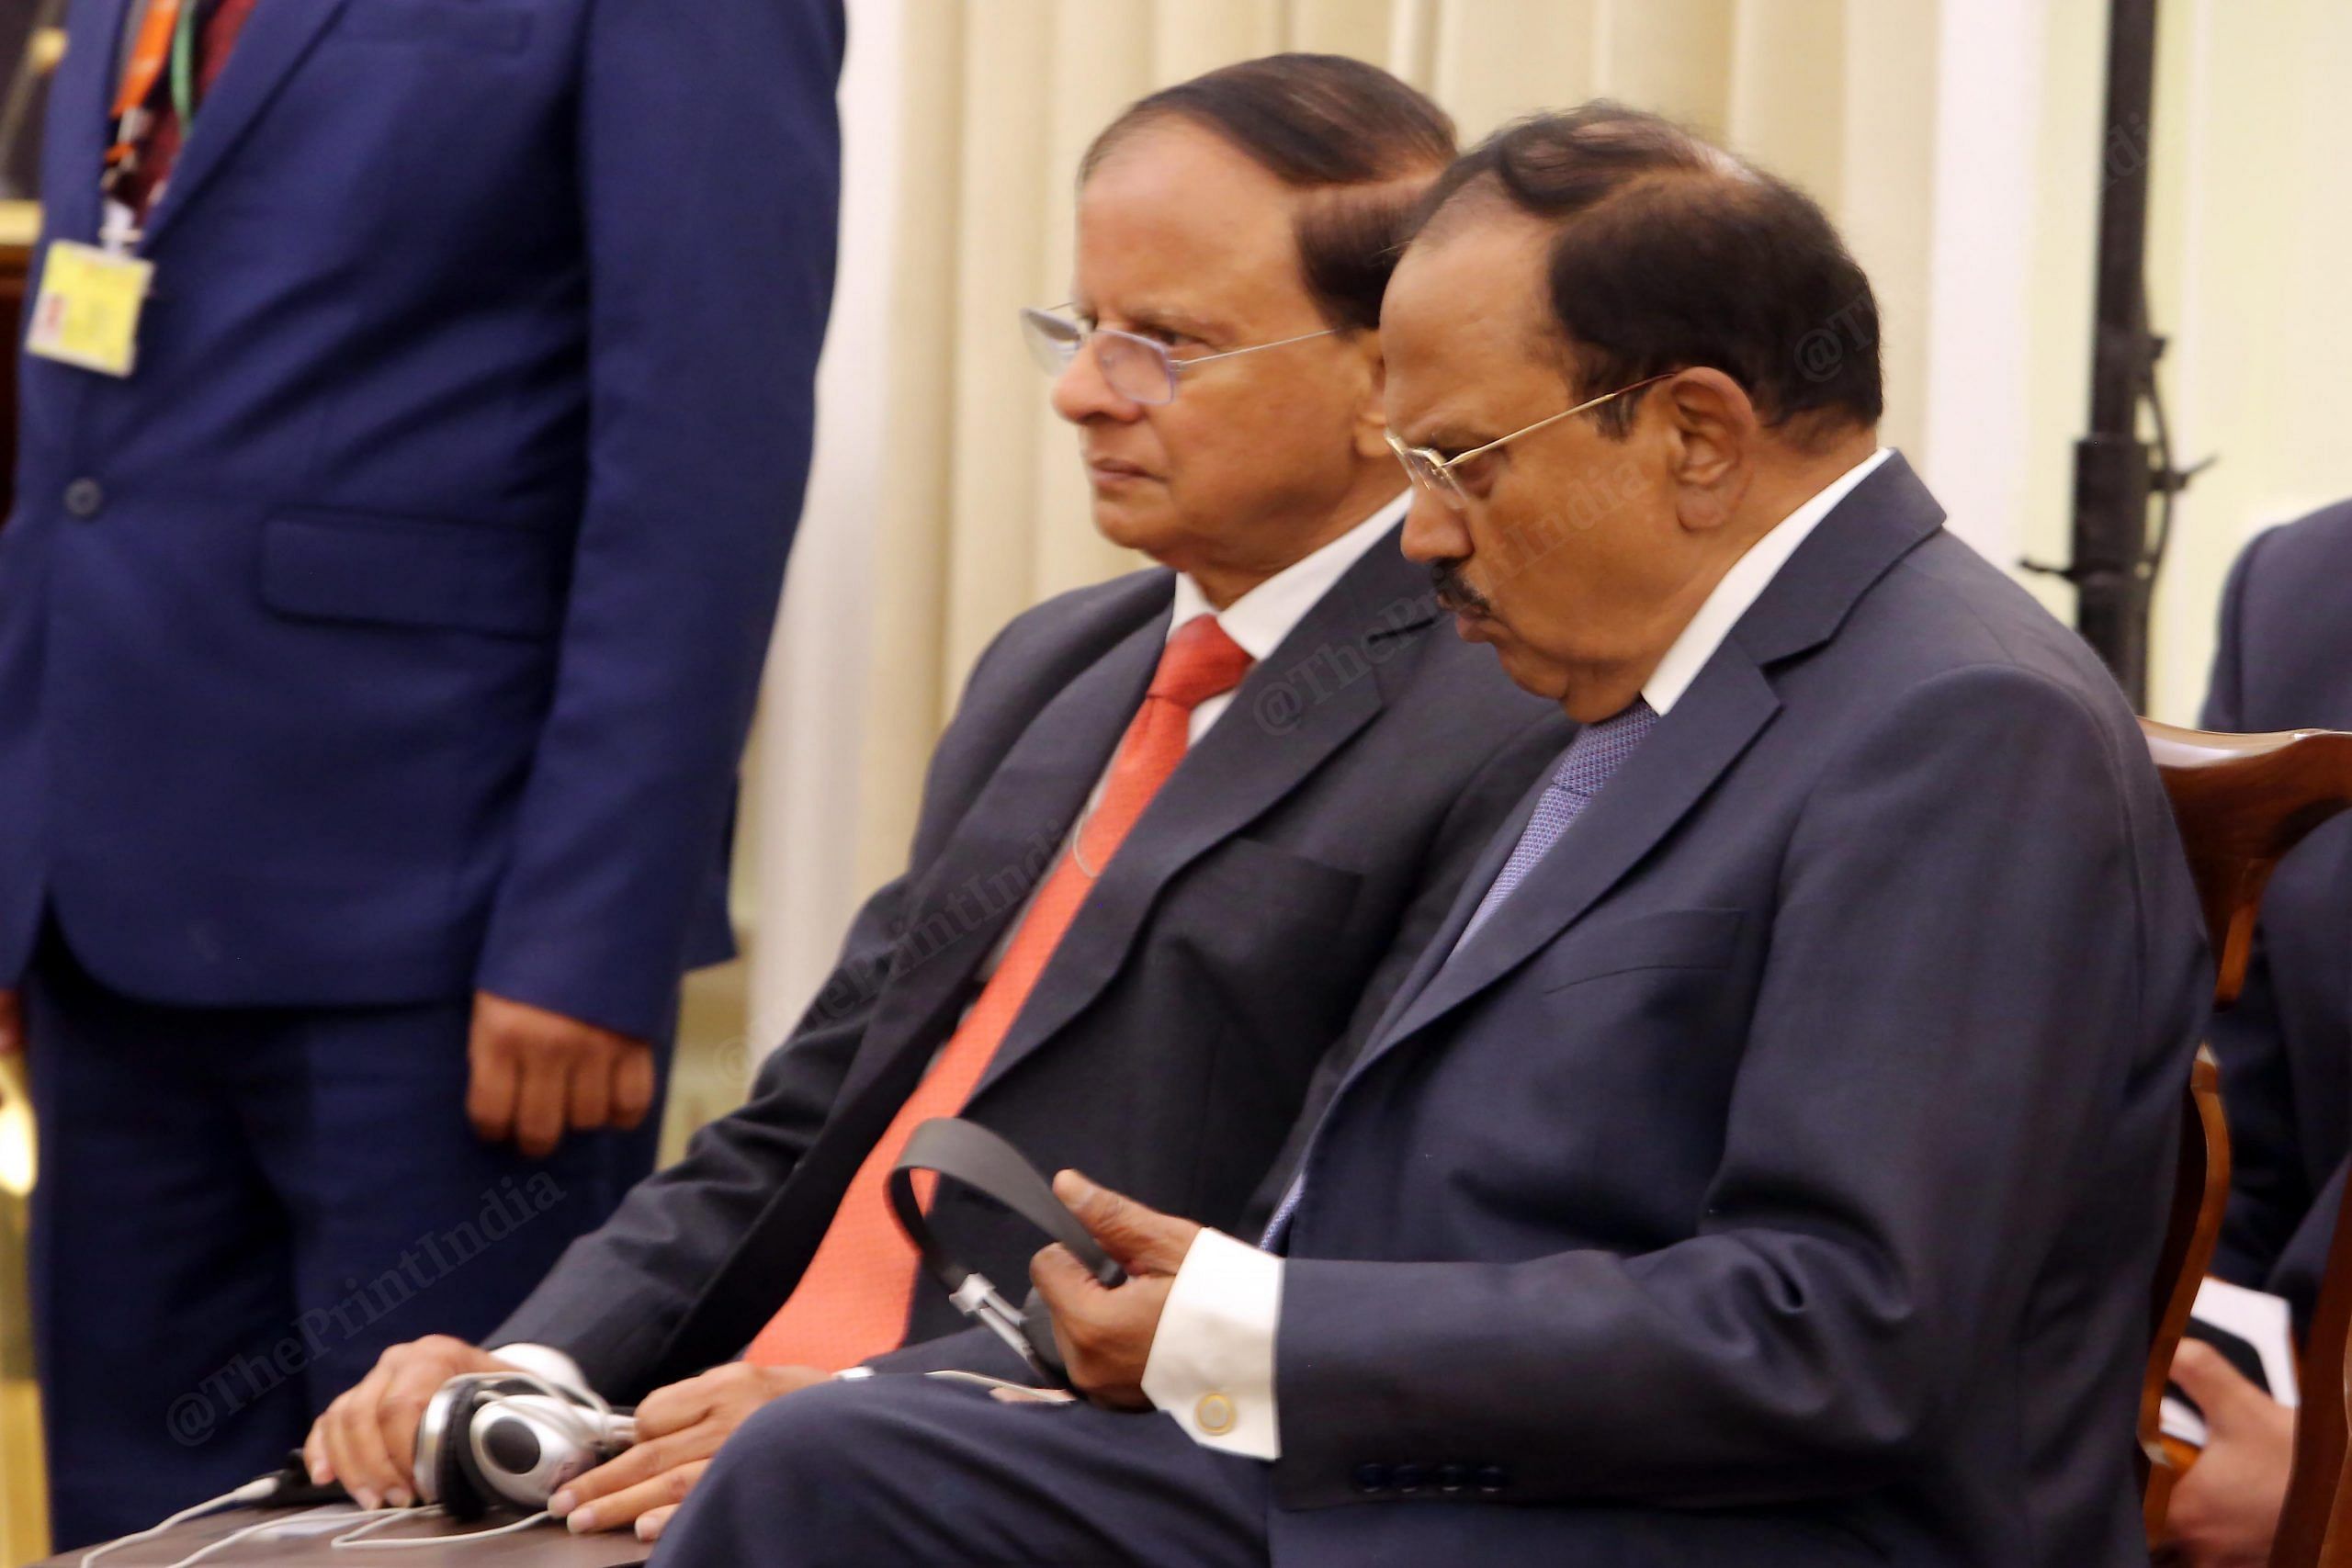 P.K. Mishra, principal secretary to the Prime Minister of India, and National Security Adviser Ajit Doval at the Modi-Meloni press conference at Hyderabad House | Praveen Jain | ThePrint